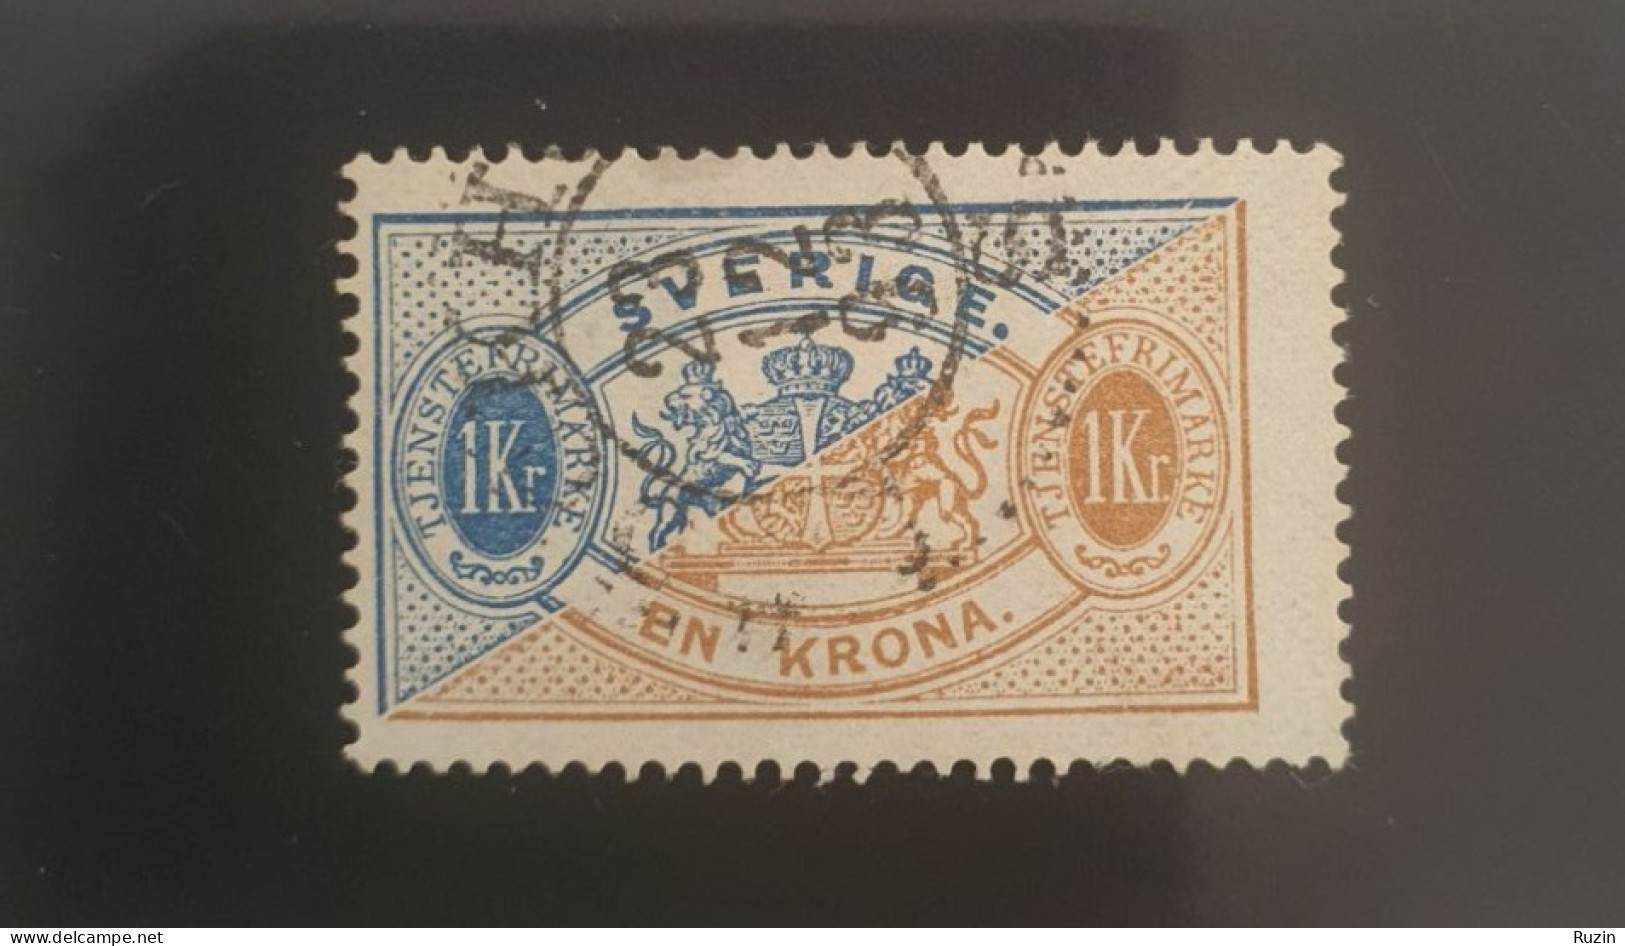 Sweden Stamp - Coat Of Arms1 Kr.  Hinged - Used Stamps